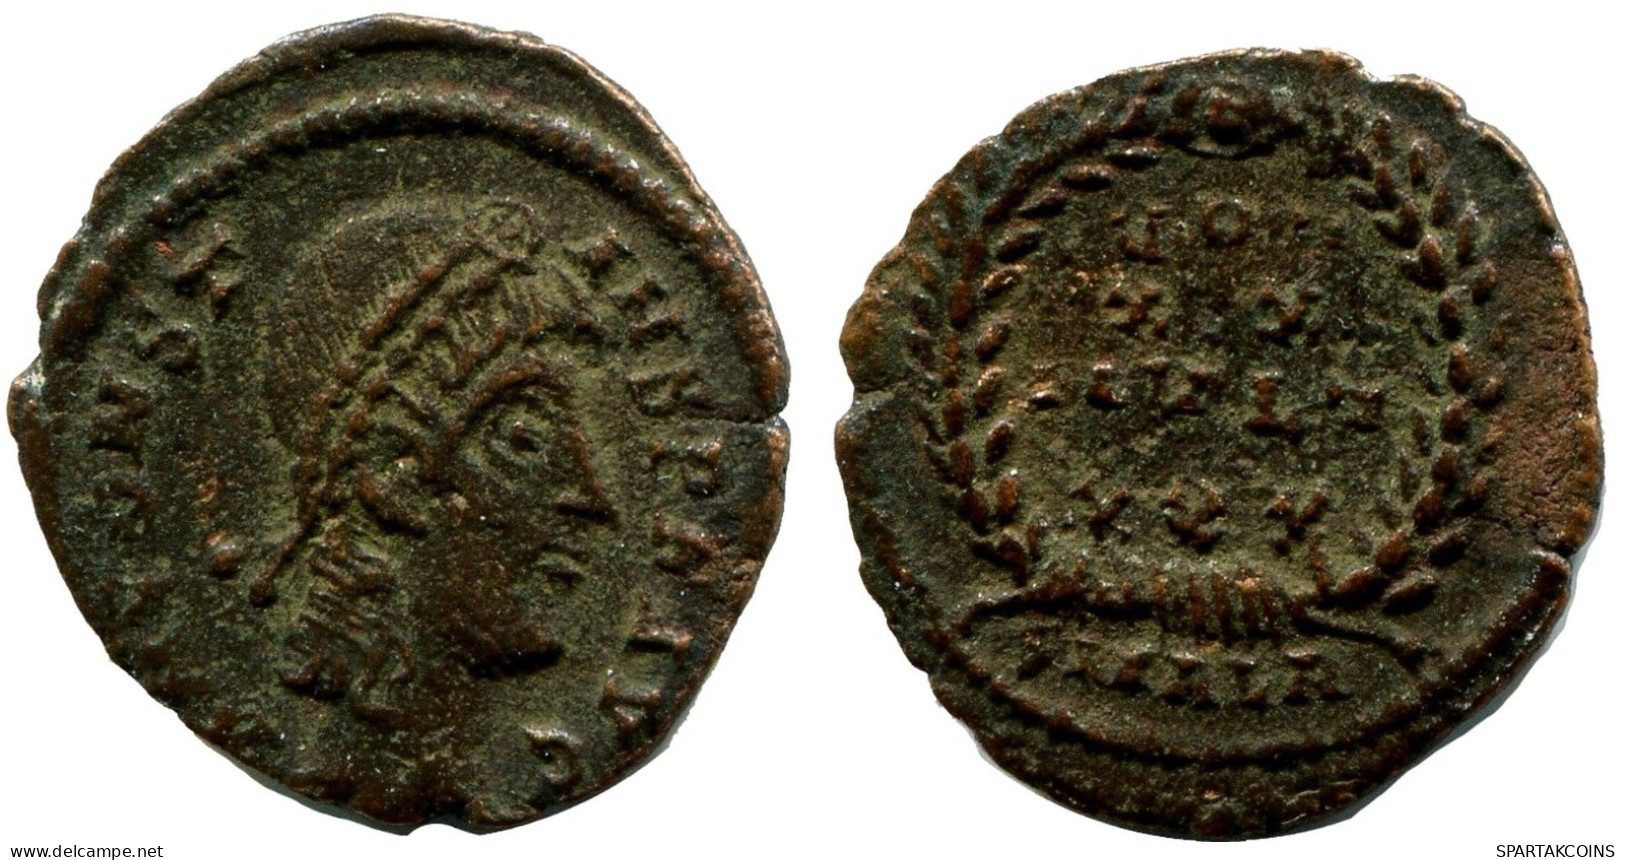 CONSTANS MINTED IN ALEKSANDRIA FROM THE ROYAL ONTARIO MUSEUM #ANC11465.14.U.A - The Christian Empire (307 AD To 363 AD)